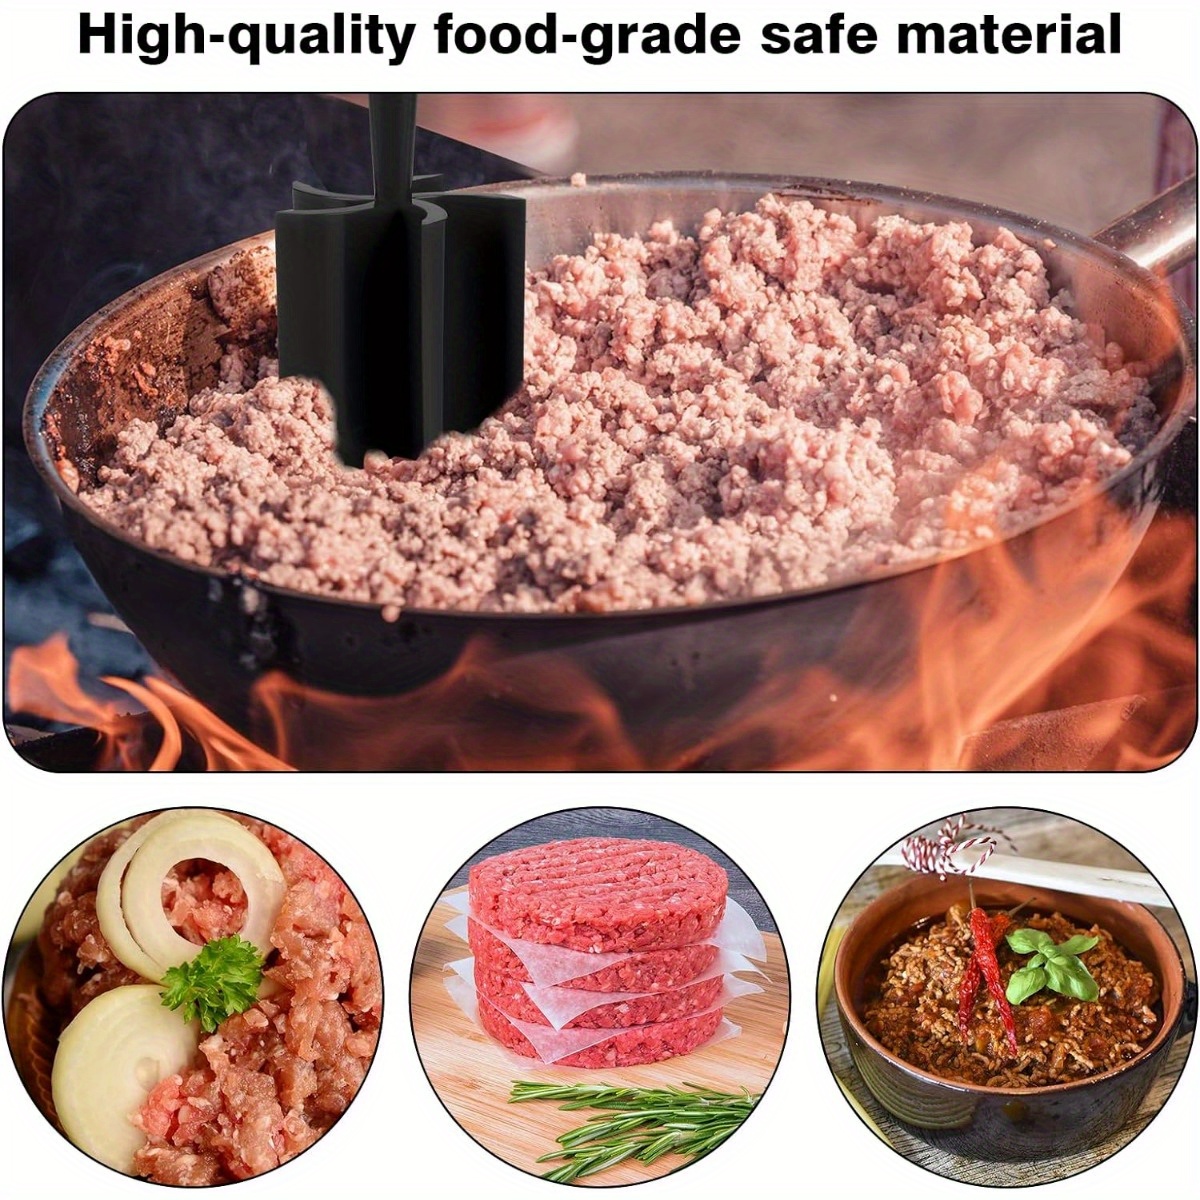  Meat Chopper, Ground Beef Masher, Heat Resistant Ground Beef/ Meat Chopper, Meat Masher & Smasher for Hamburger Meat, Ground Beef, Turkey  and More, Potato Masher, Nylon Hamburger Chopper, Mix Chopper: Home 